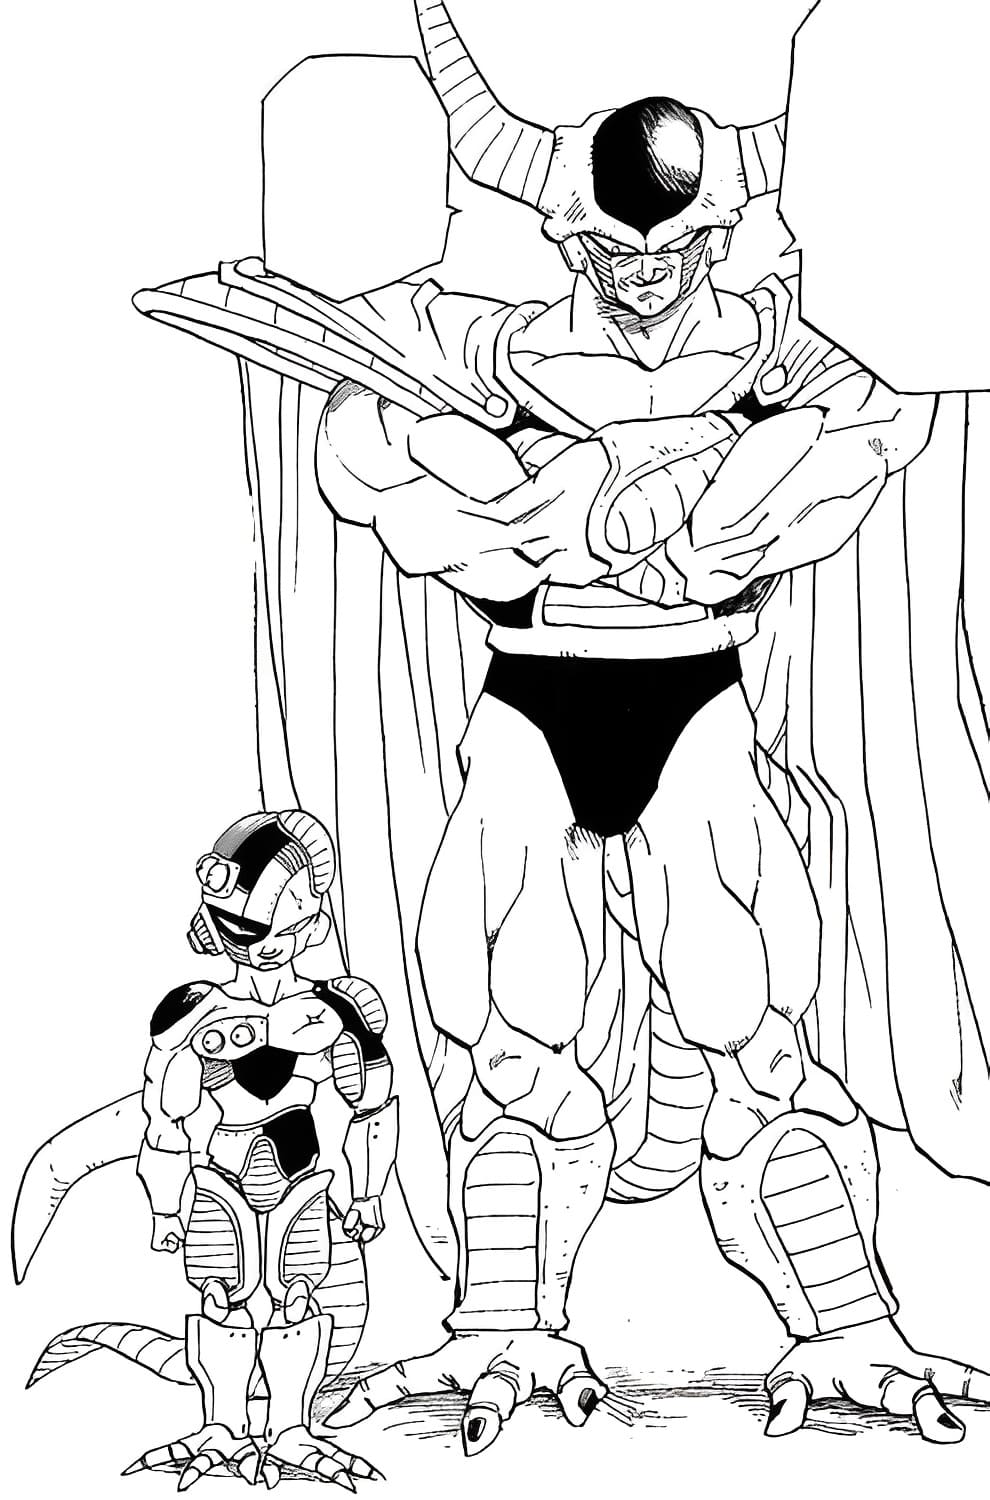 Future Frieza and King Cold